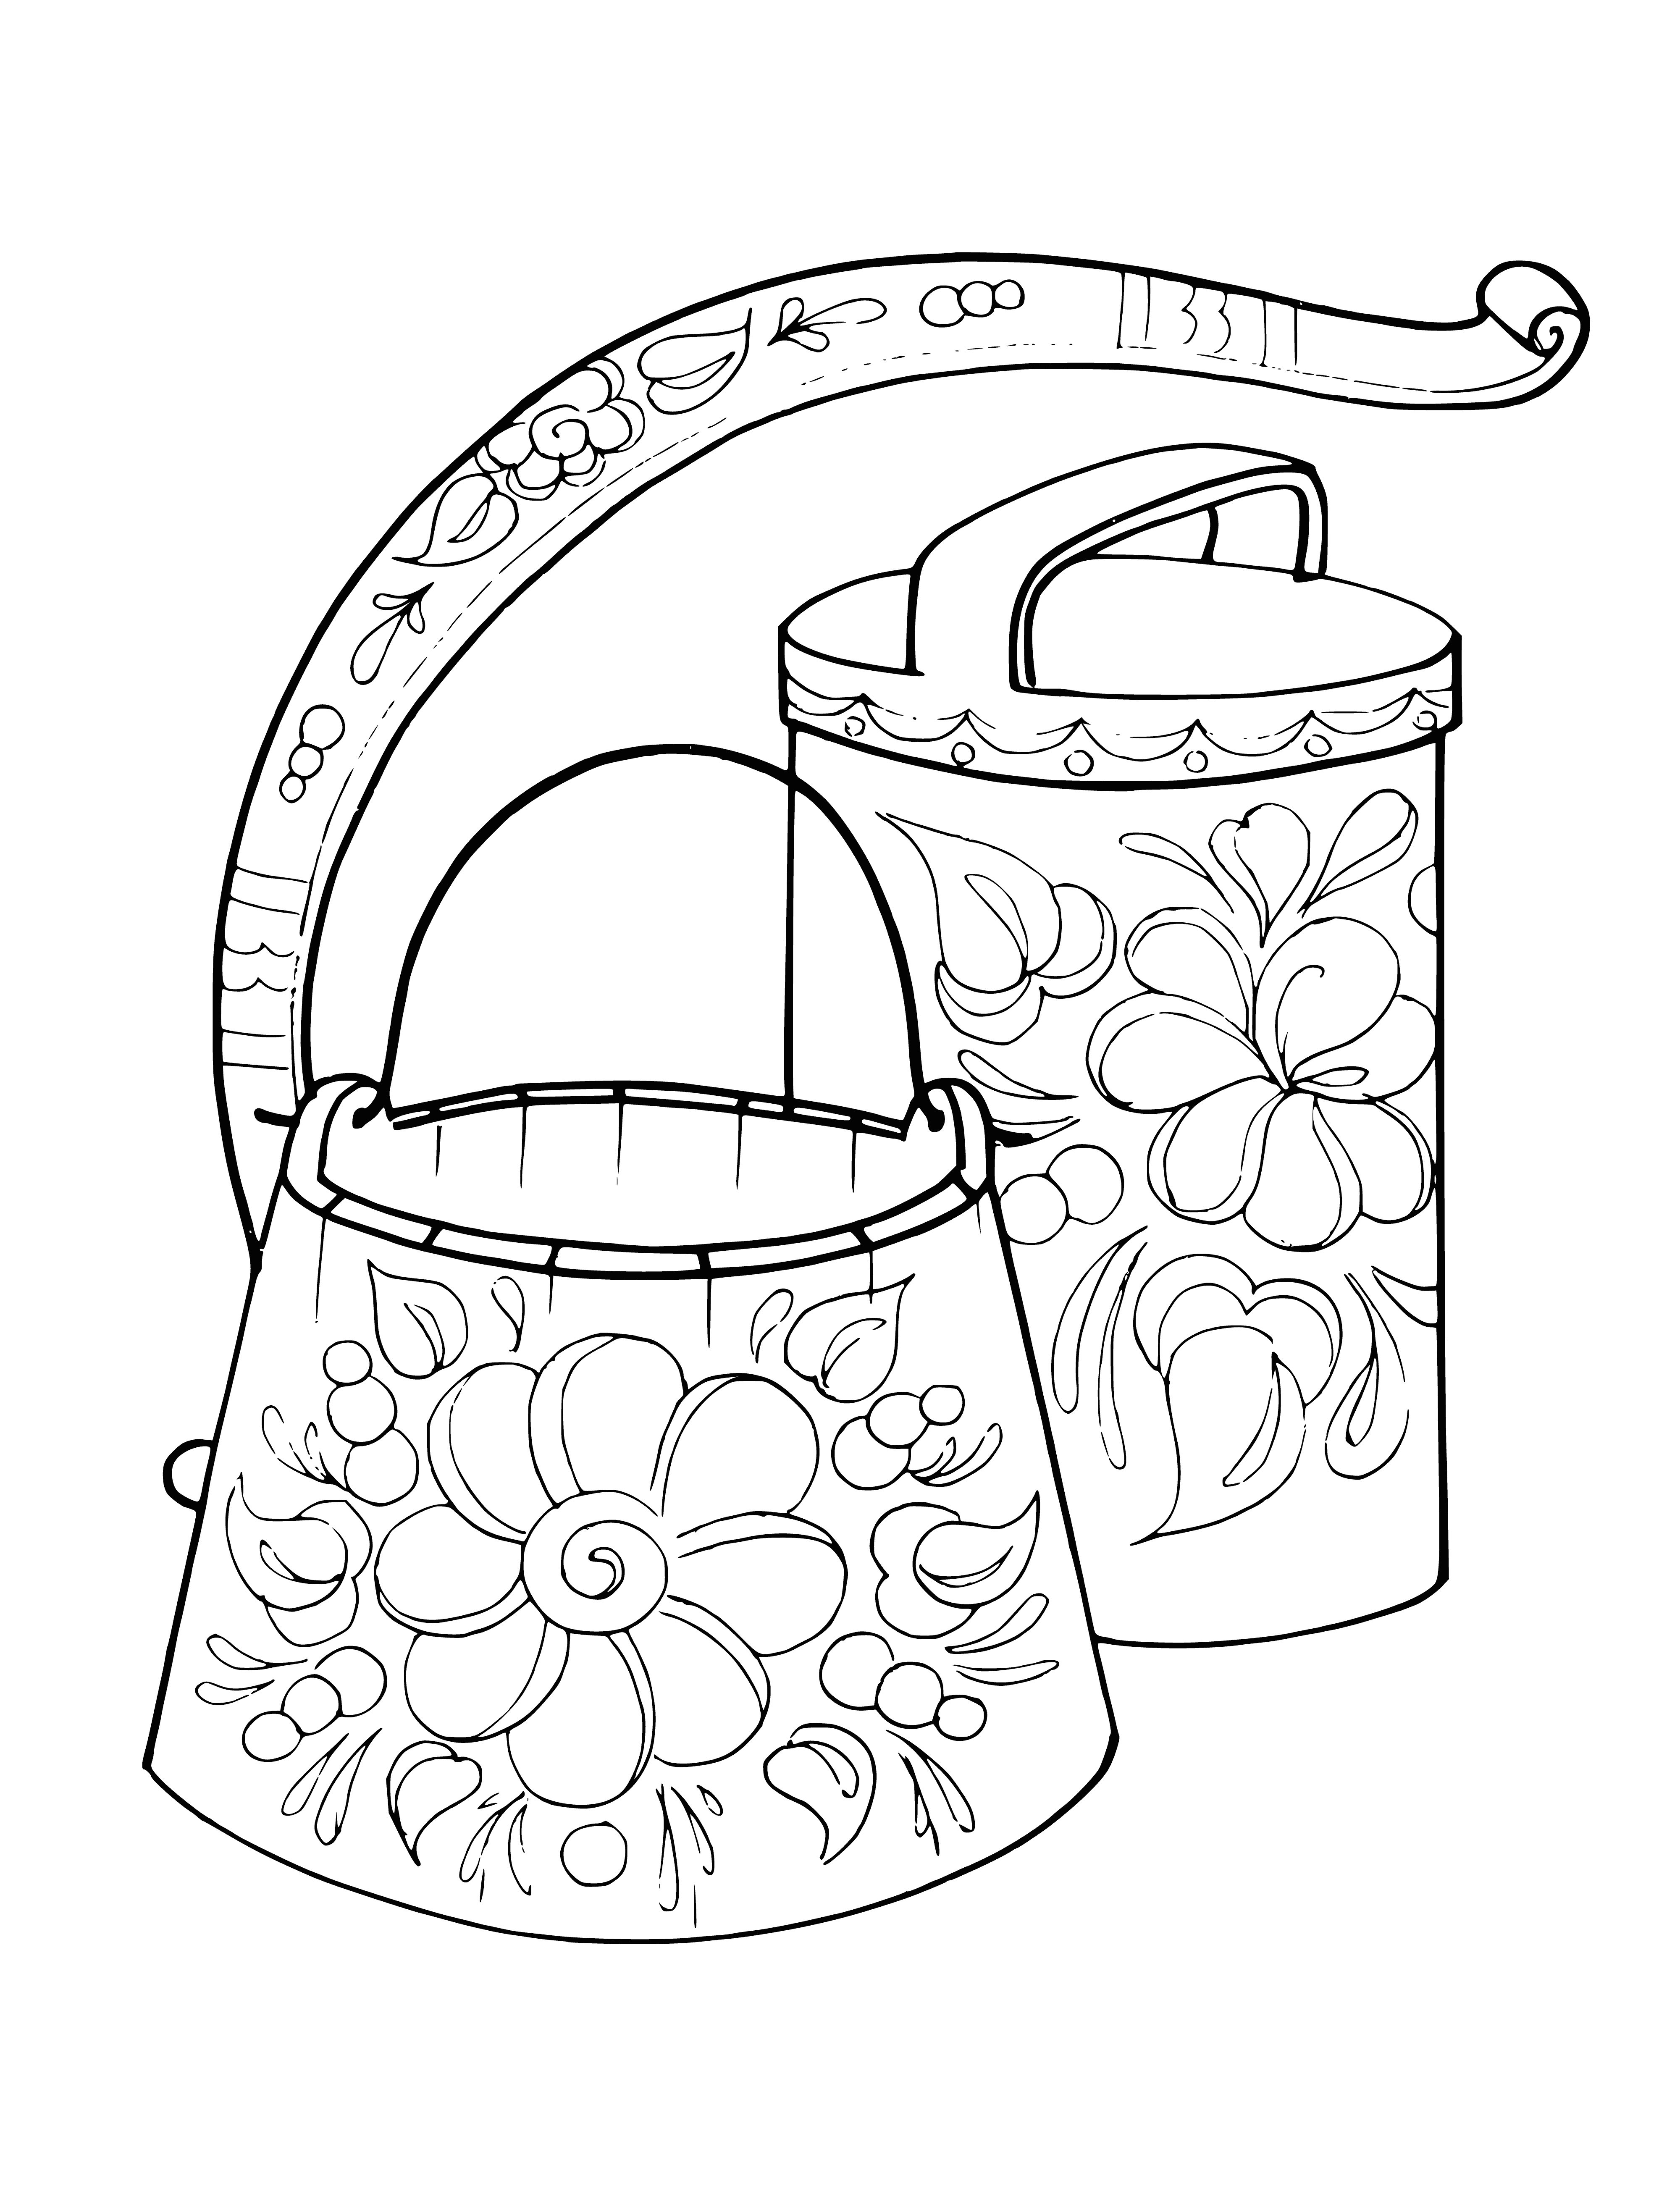 Ural-Siberian painting coloring page